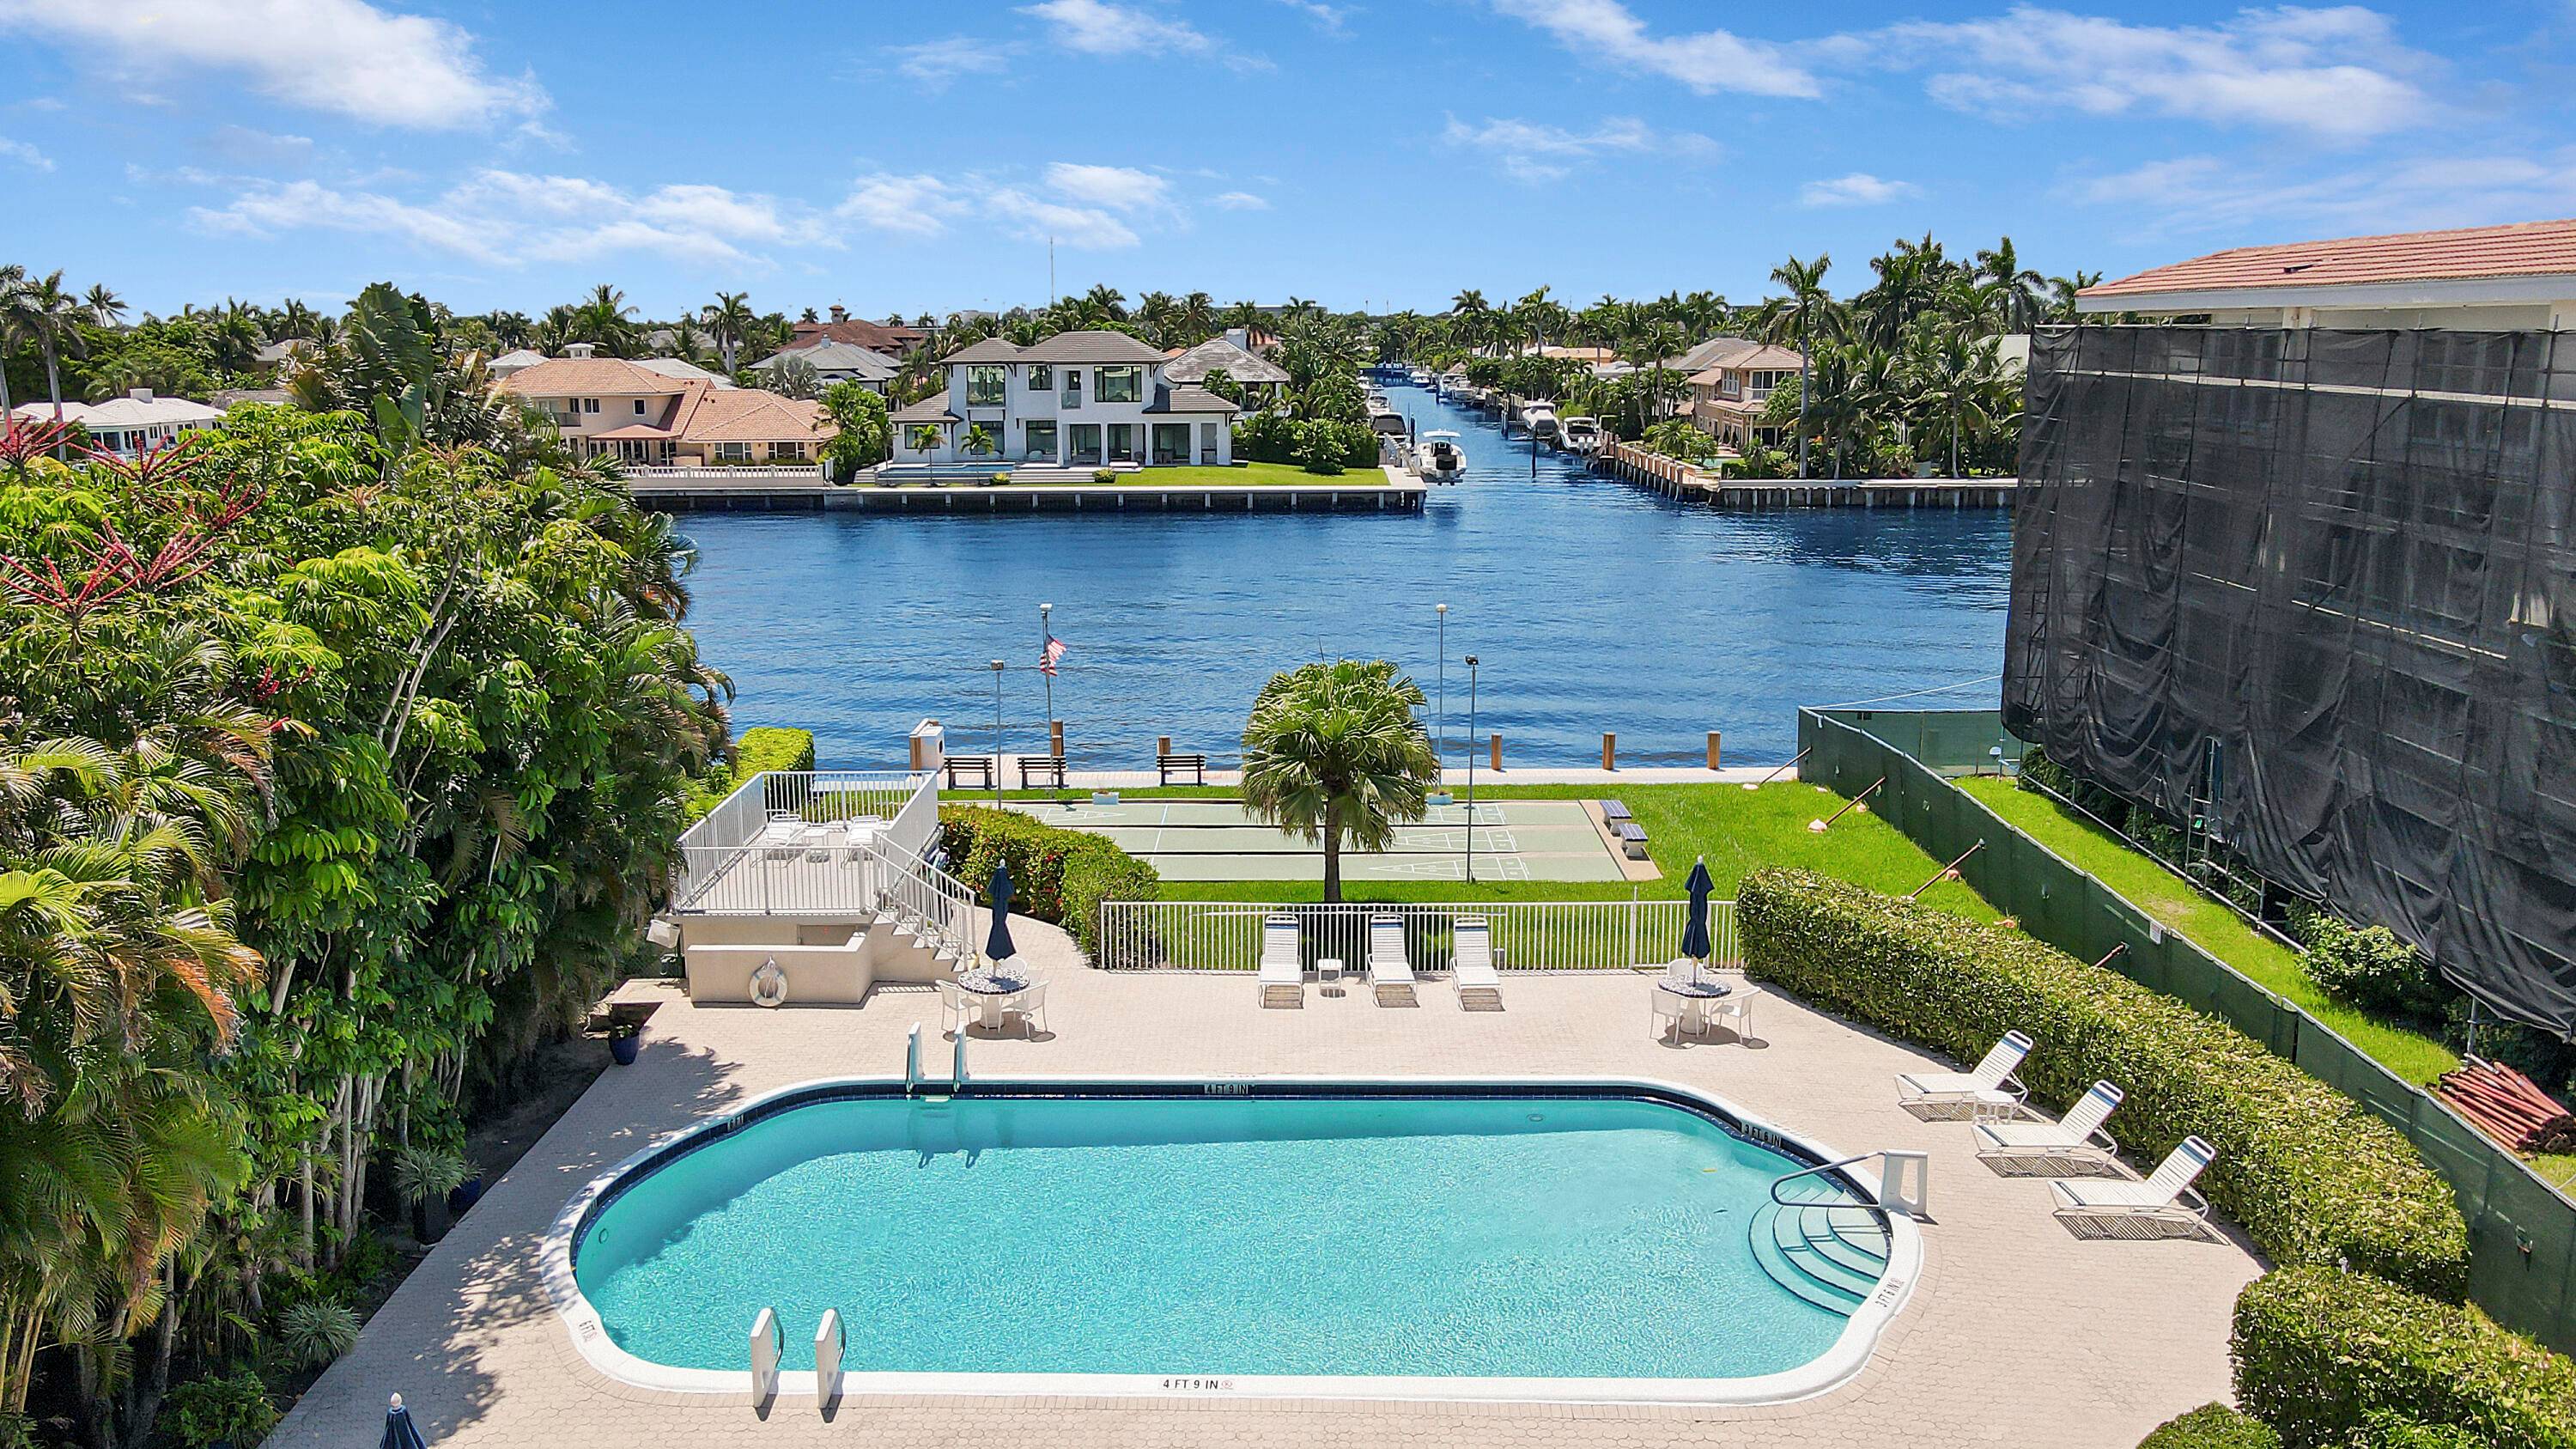 LOCATION, LOCATION ! Your serene beach hideaway is a rare, turnkey opportunity in a beautiful waterfront community perfect for a vacation getaway.